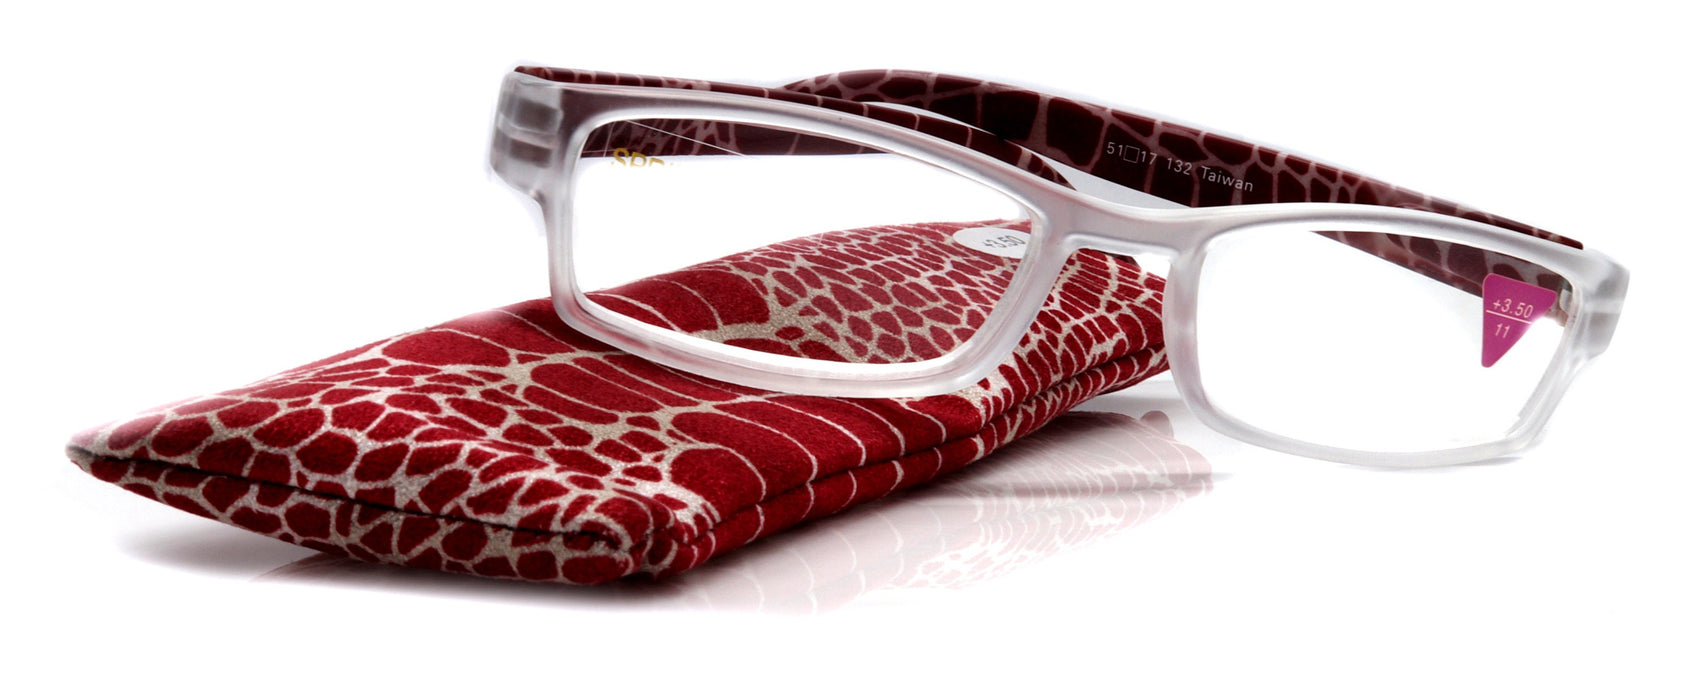 Xena, (Premium) Reading Glasses, Square Readers Clear Frosted +1.25.. +6 High / Strong Magnifying Eyeglasses (Red Giraffe) NY Fifth Avenue